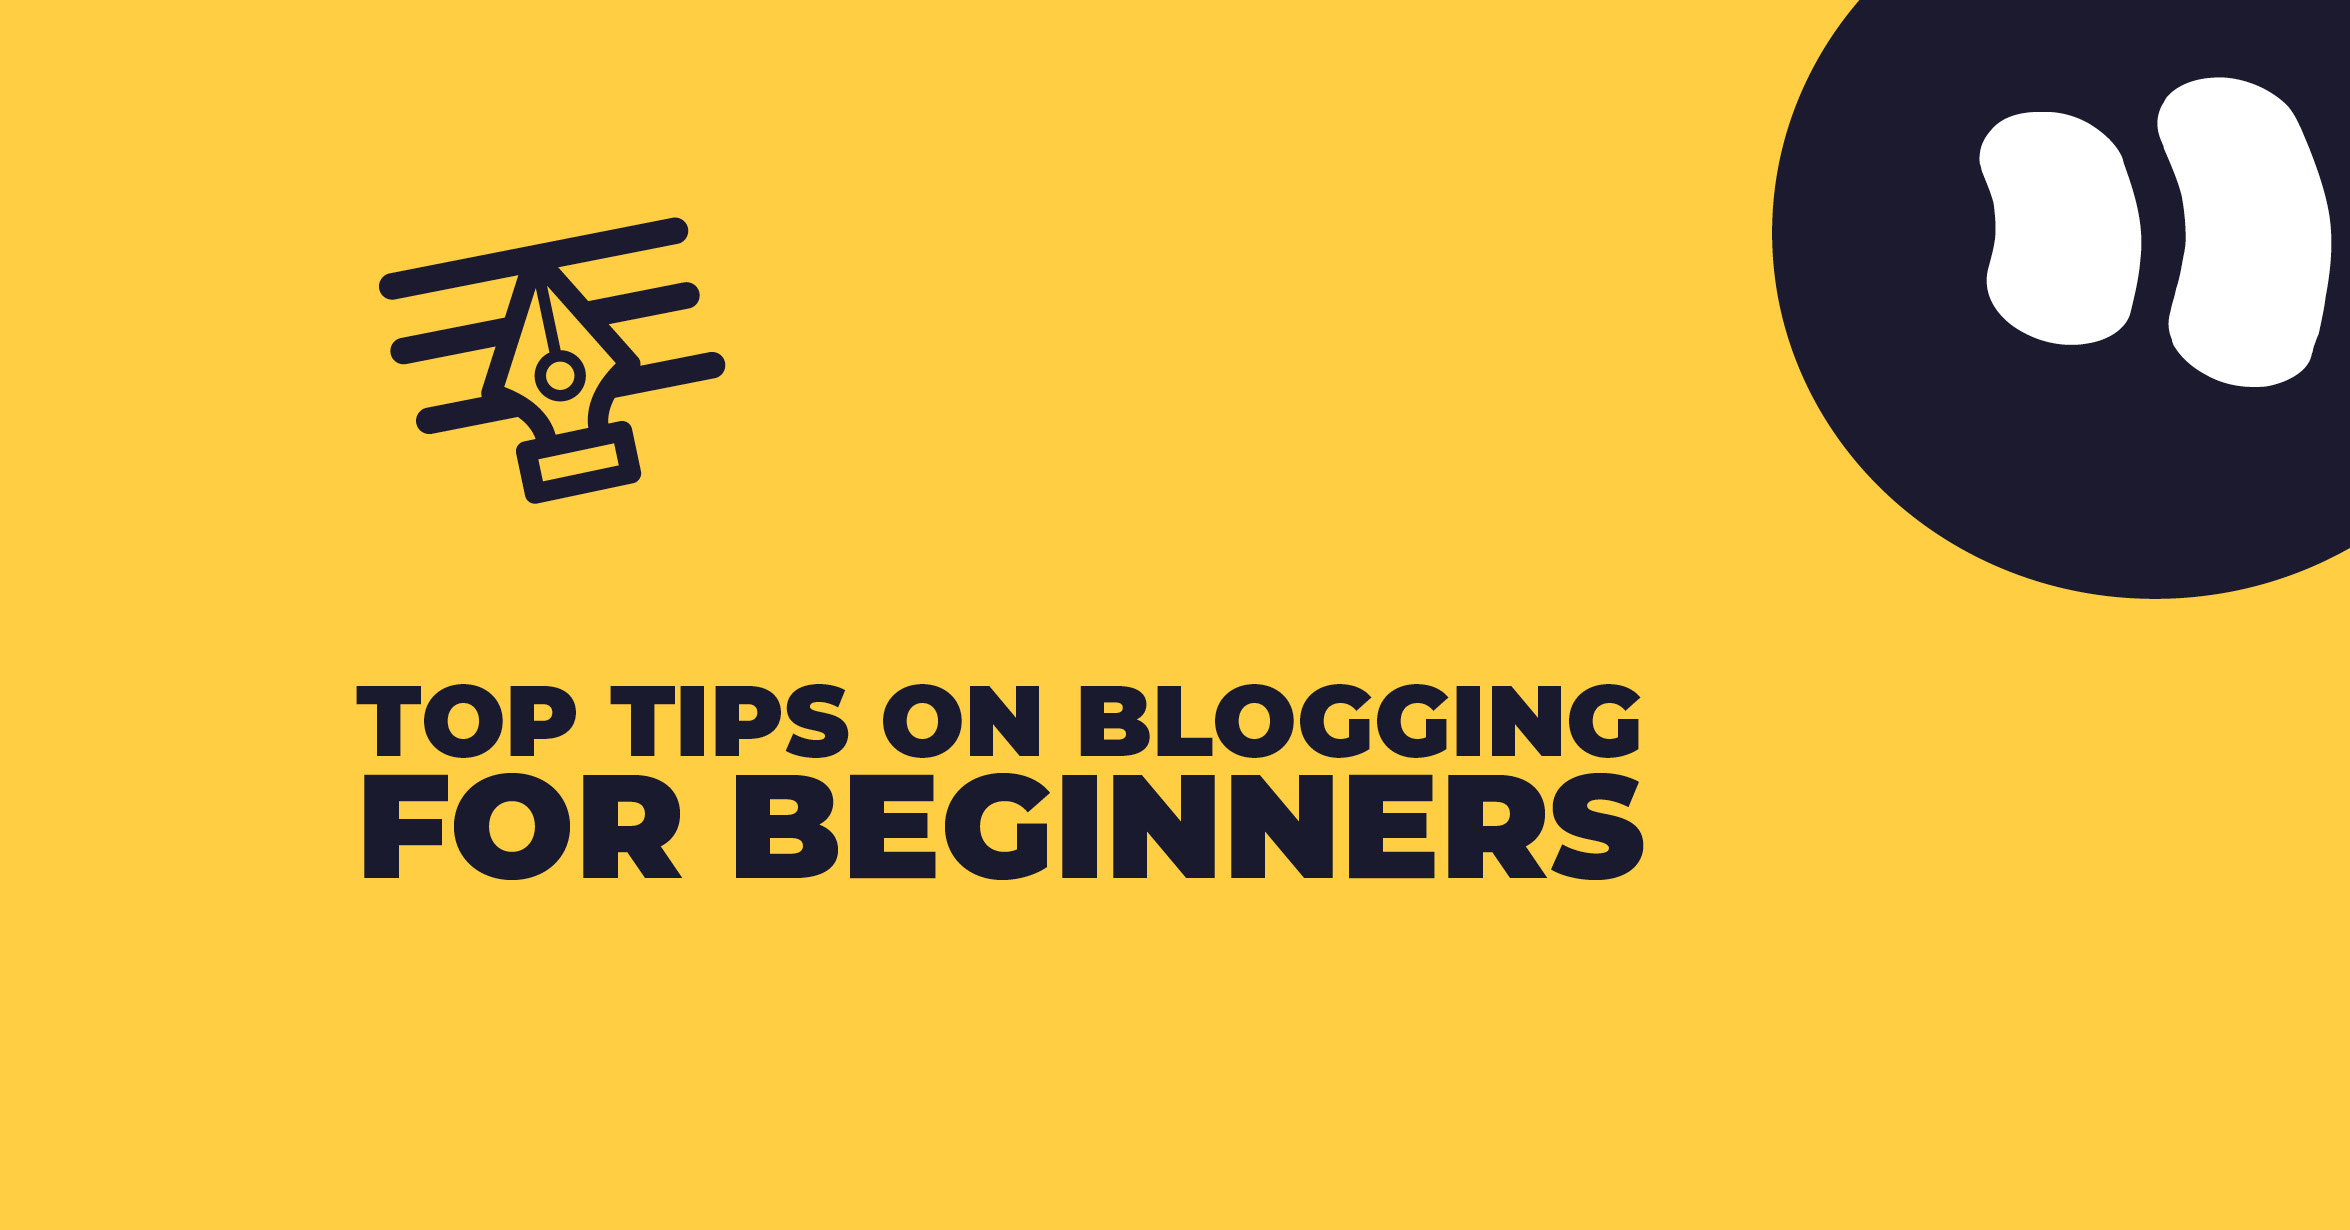 Top Tips on Blogging for Beginners